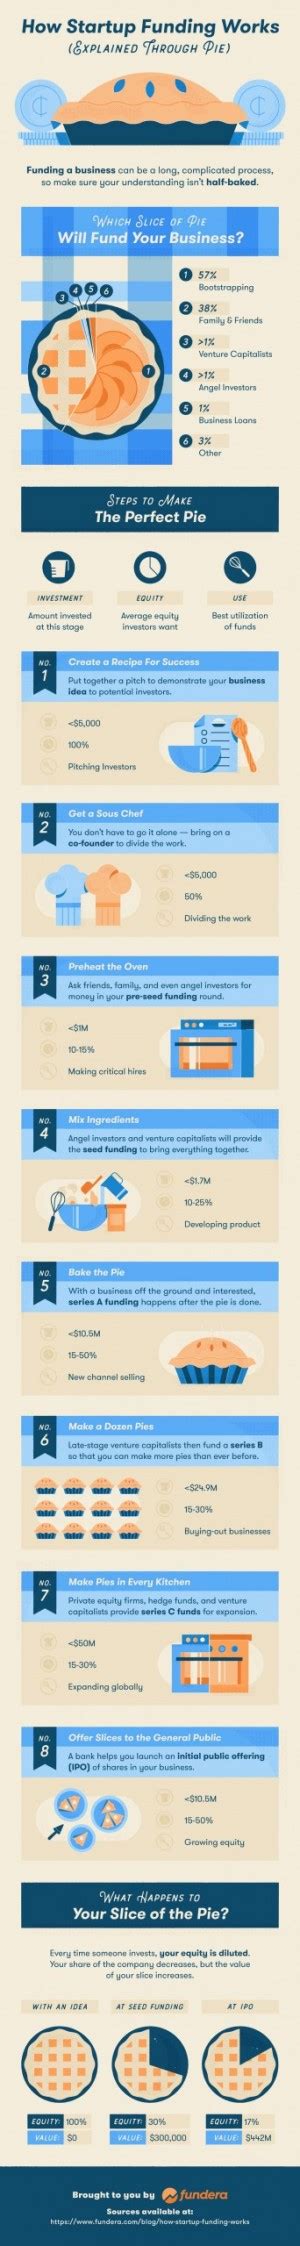 How Startup Funding Works Infographic Website